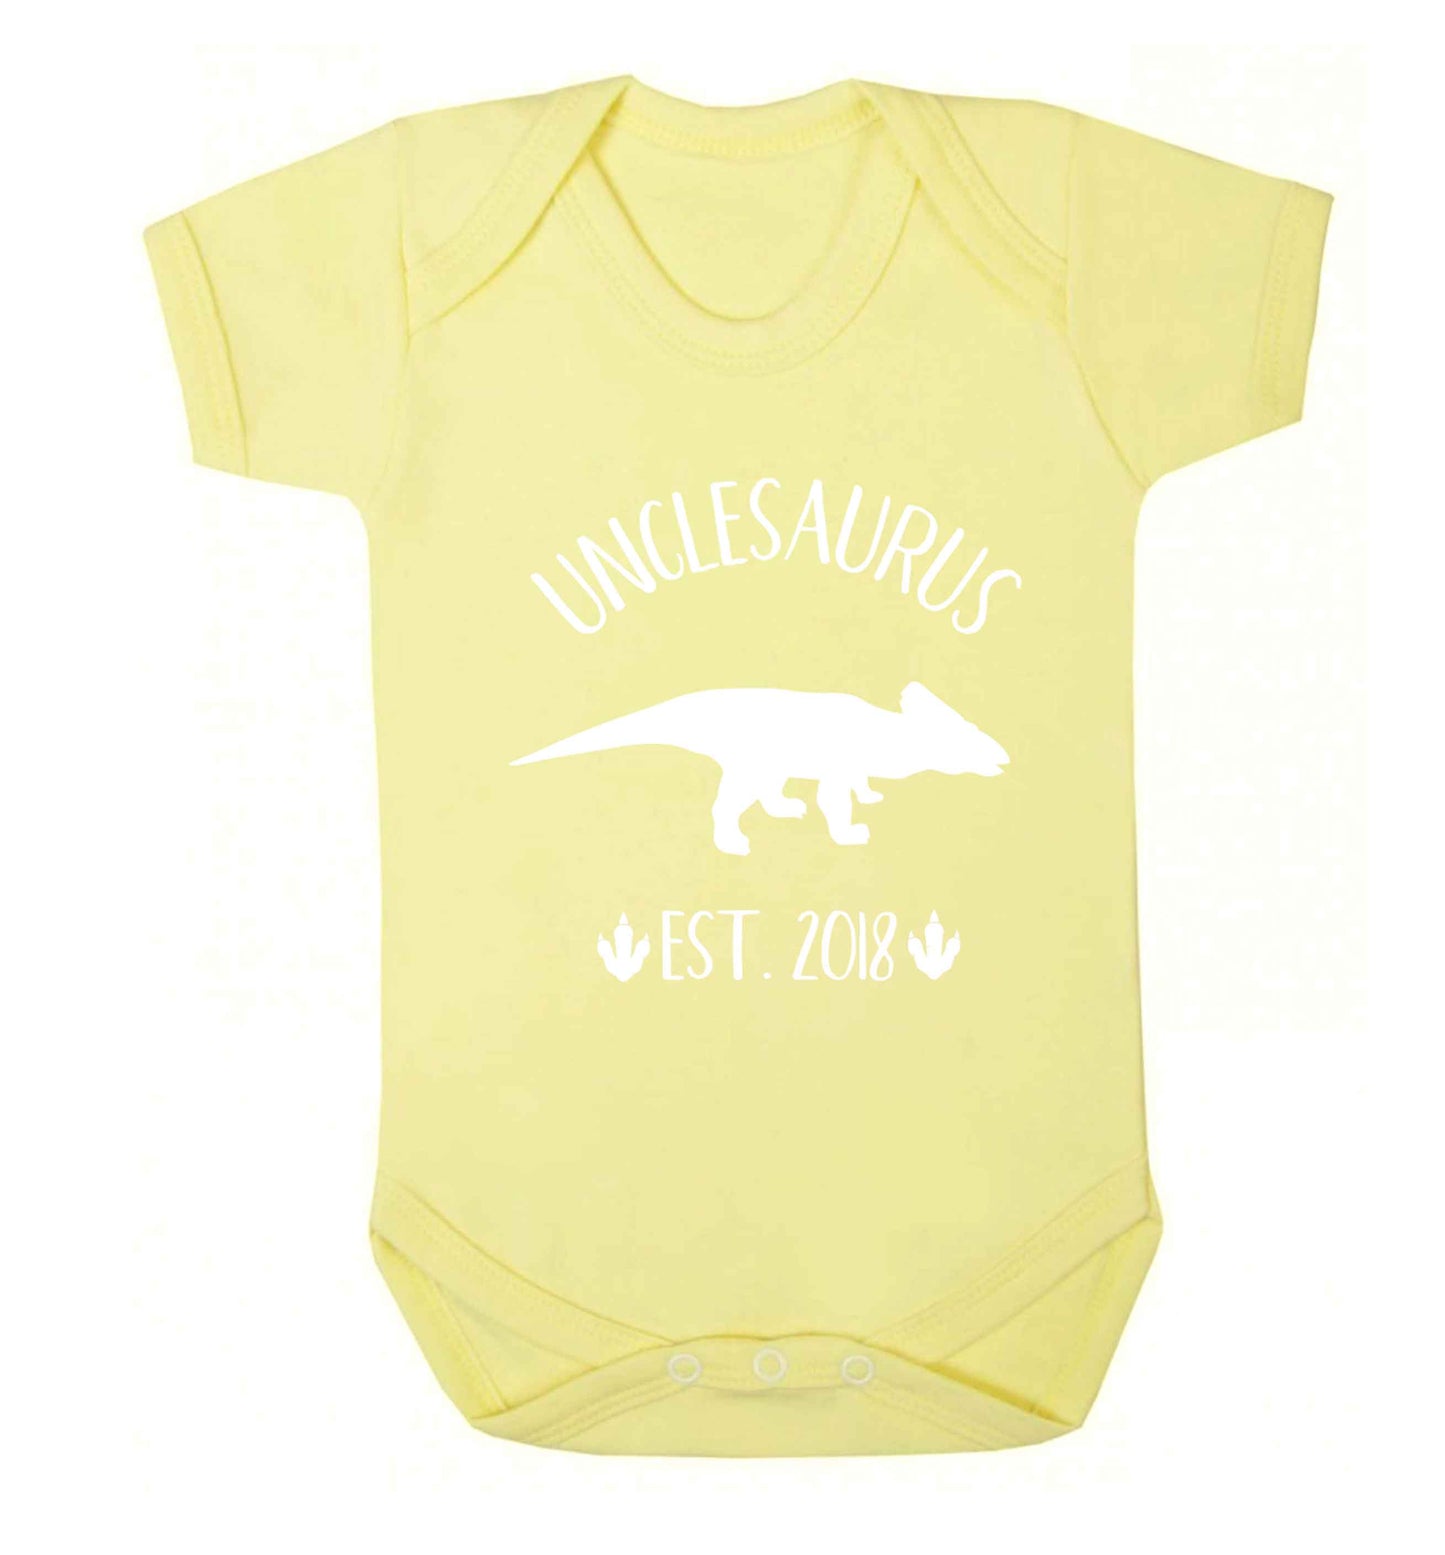 Personalised unclesaurus since (custom date) Baby Vest pale yellow 18-24 months